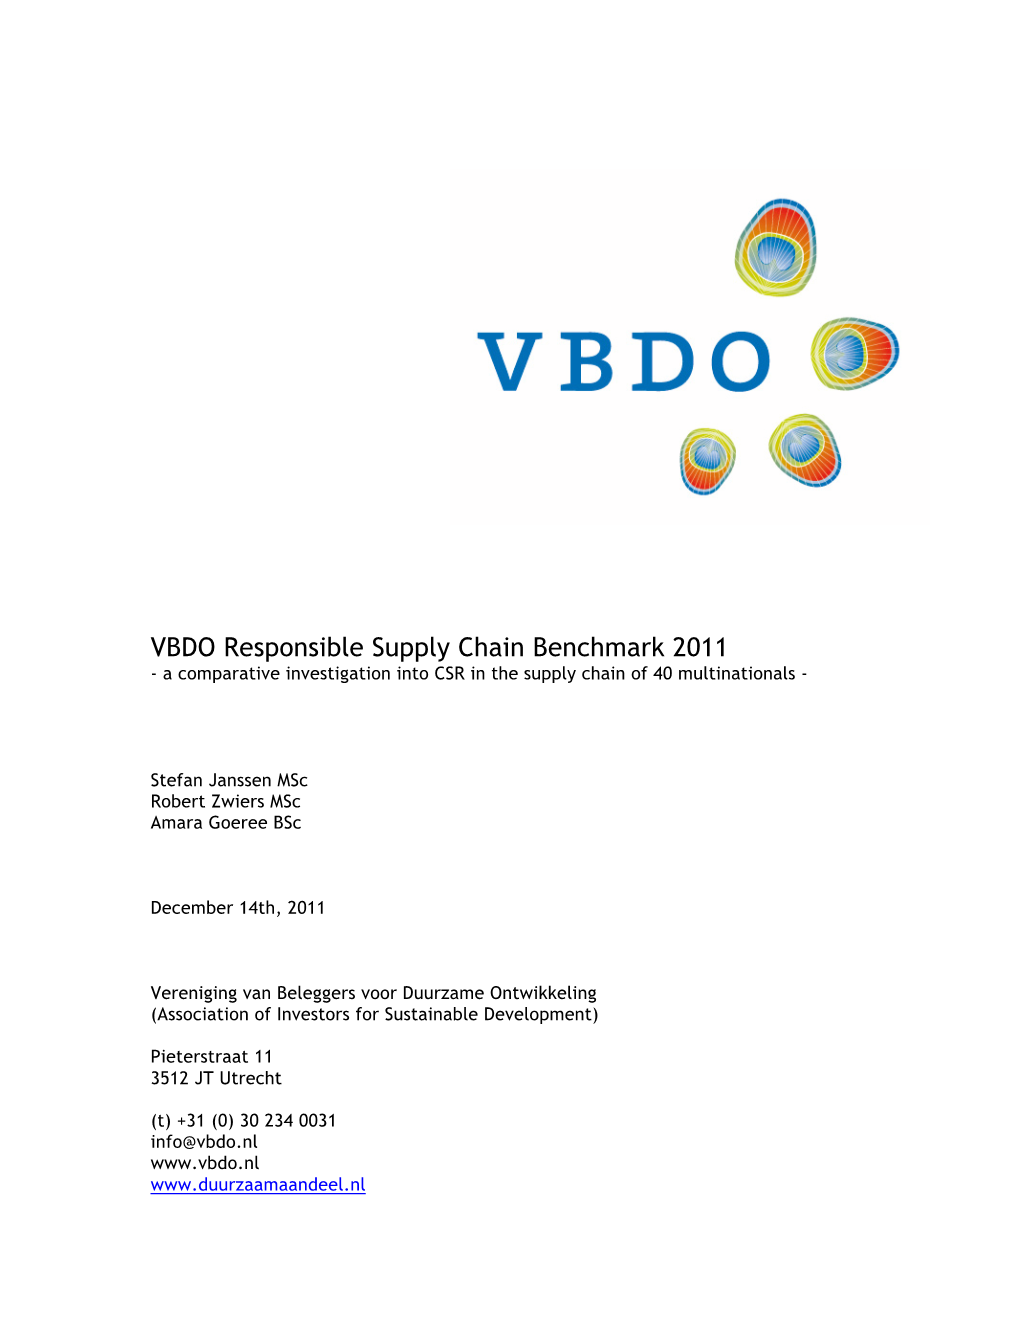 VBDO Responsible Supply Chain Benchmark 2011 - a Comparative Investigation Into CSR in the Supply Chain of 40 Multinationals